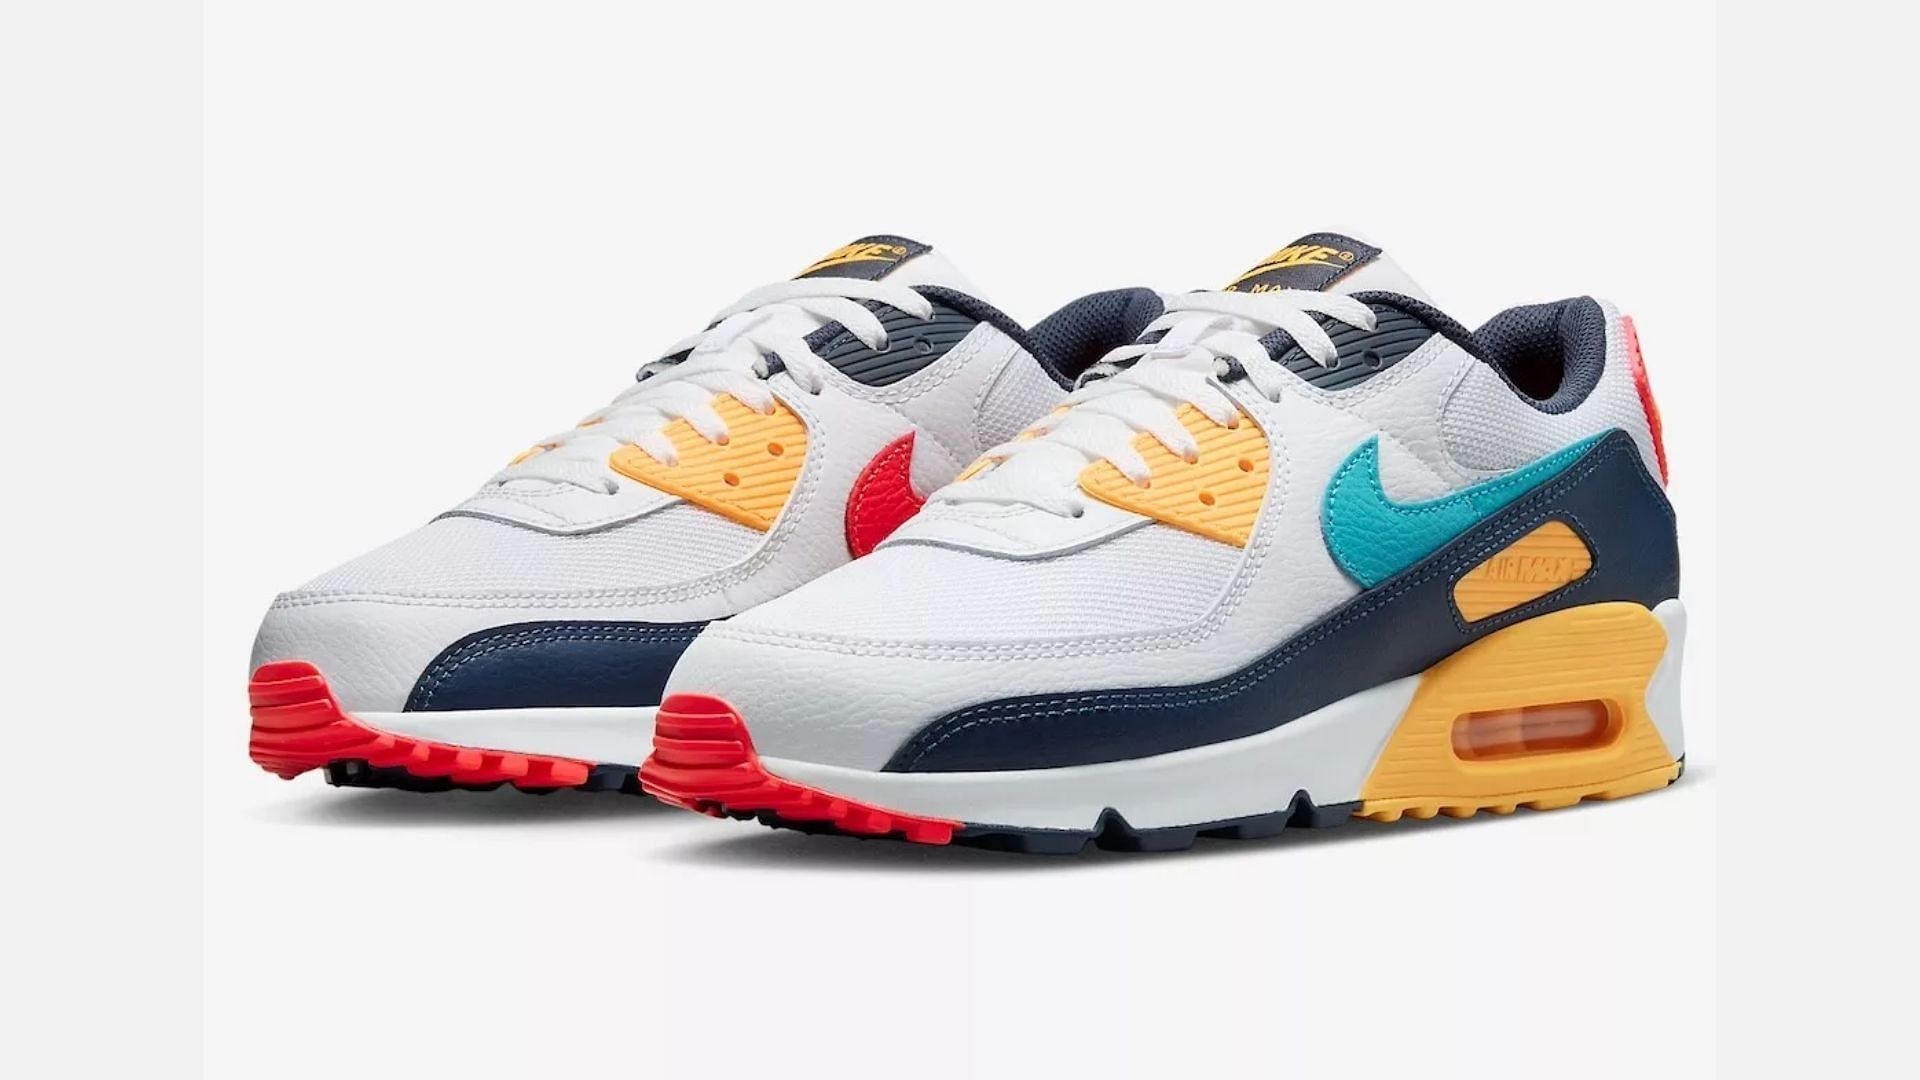 Nike Air Max 90 &quot; University gold and dusty cactus&quot; ( Image via eBay)